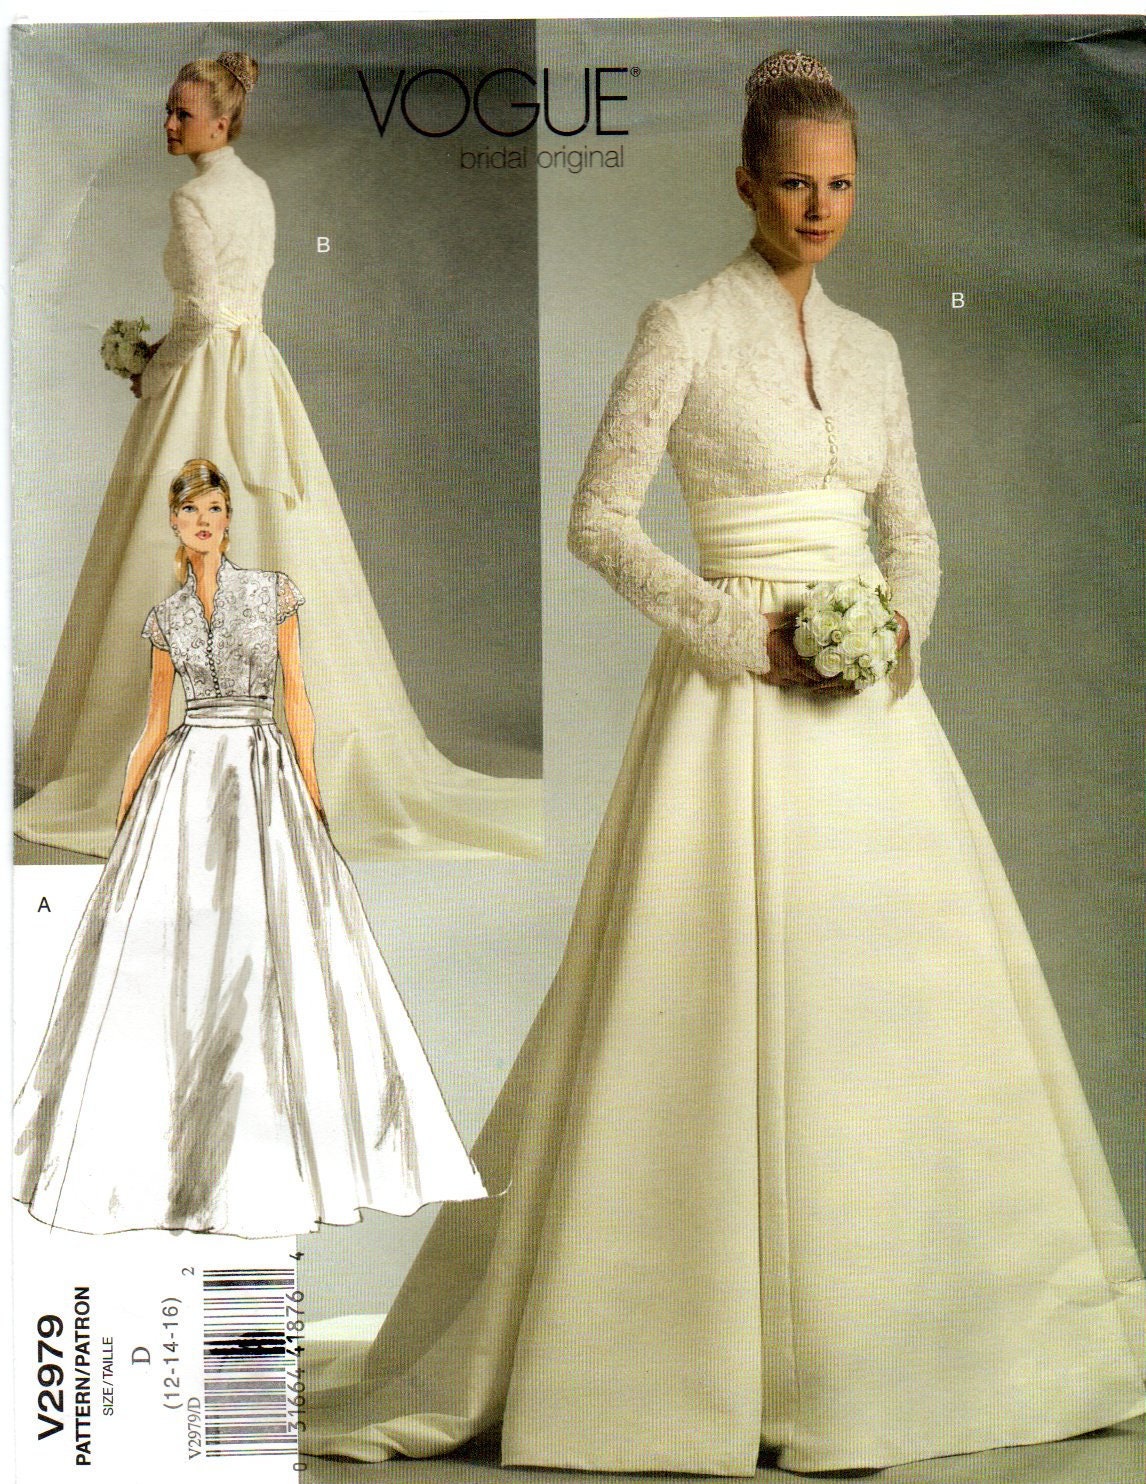 Grace Kelly's Wedding Gown - The Most Popular Bridal Dress of All Time |  The Vintage News